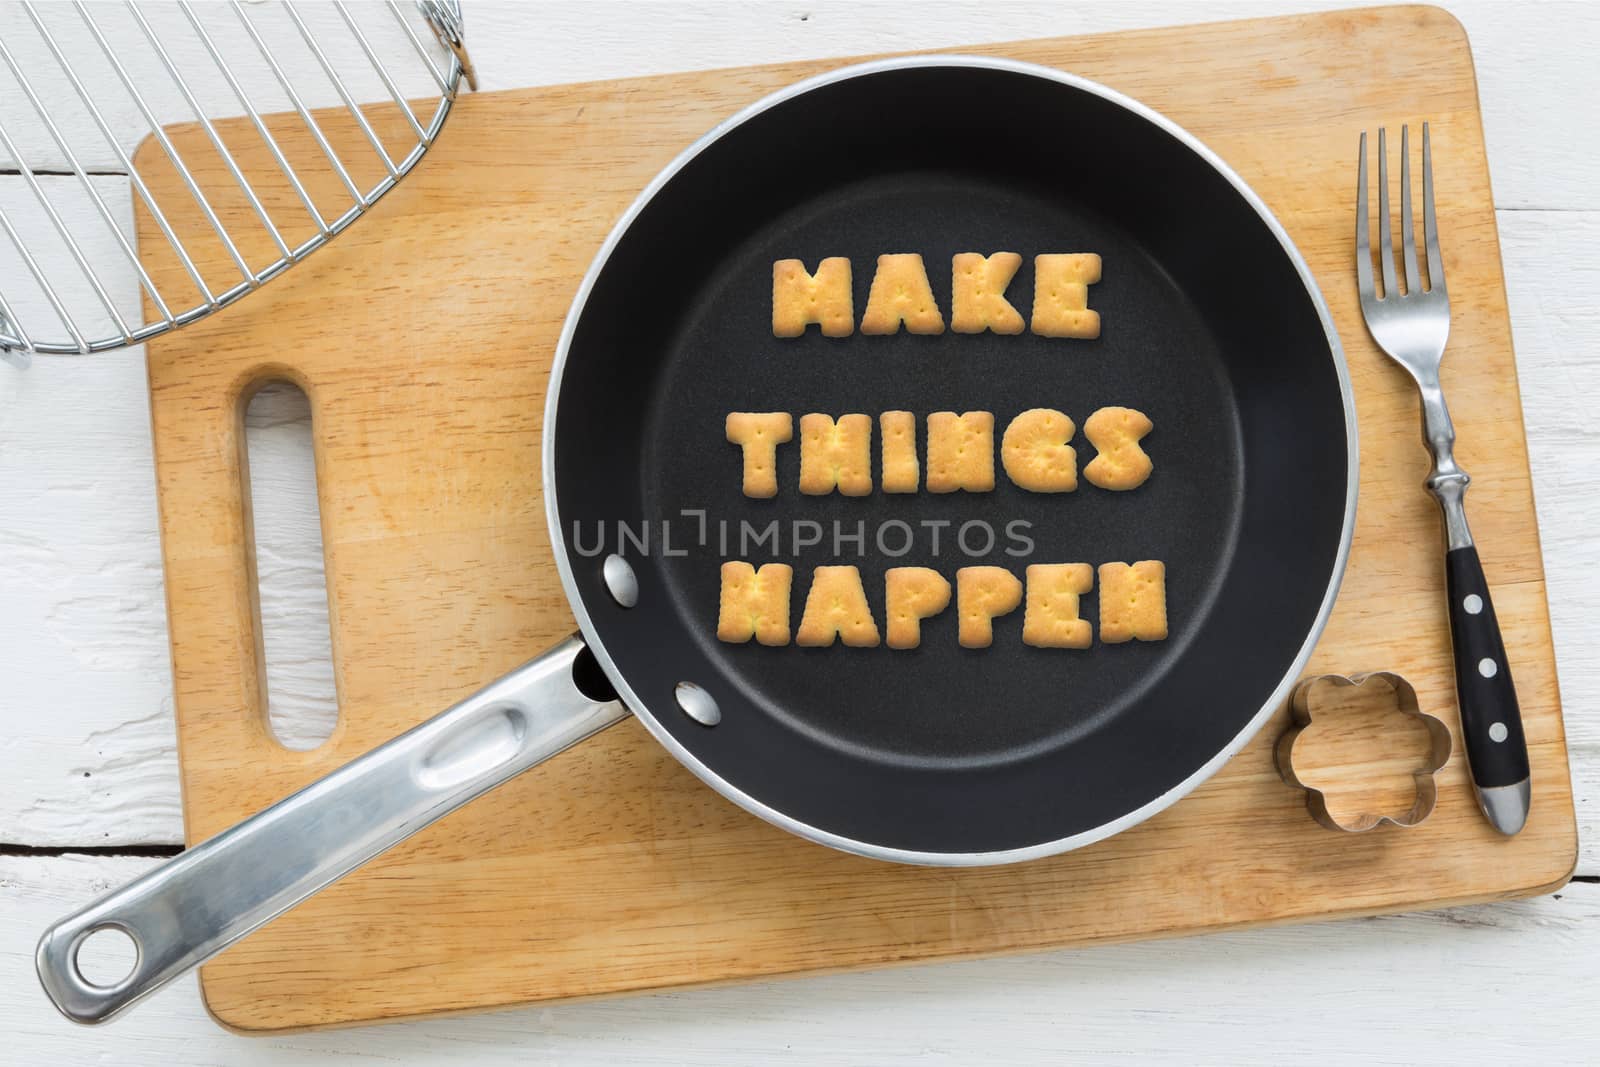 Letter cookies quote MAKE THINGS HAPPEN and kitchen utensils by vinnstock